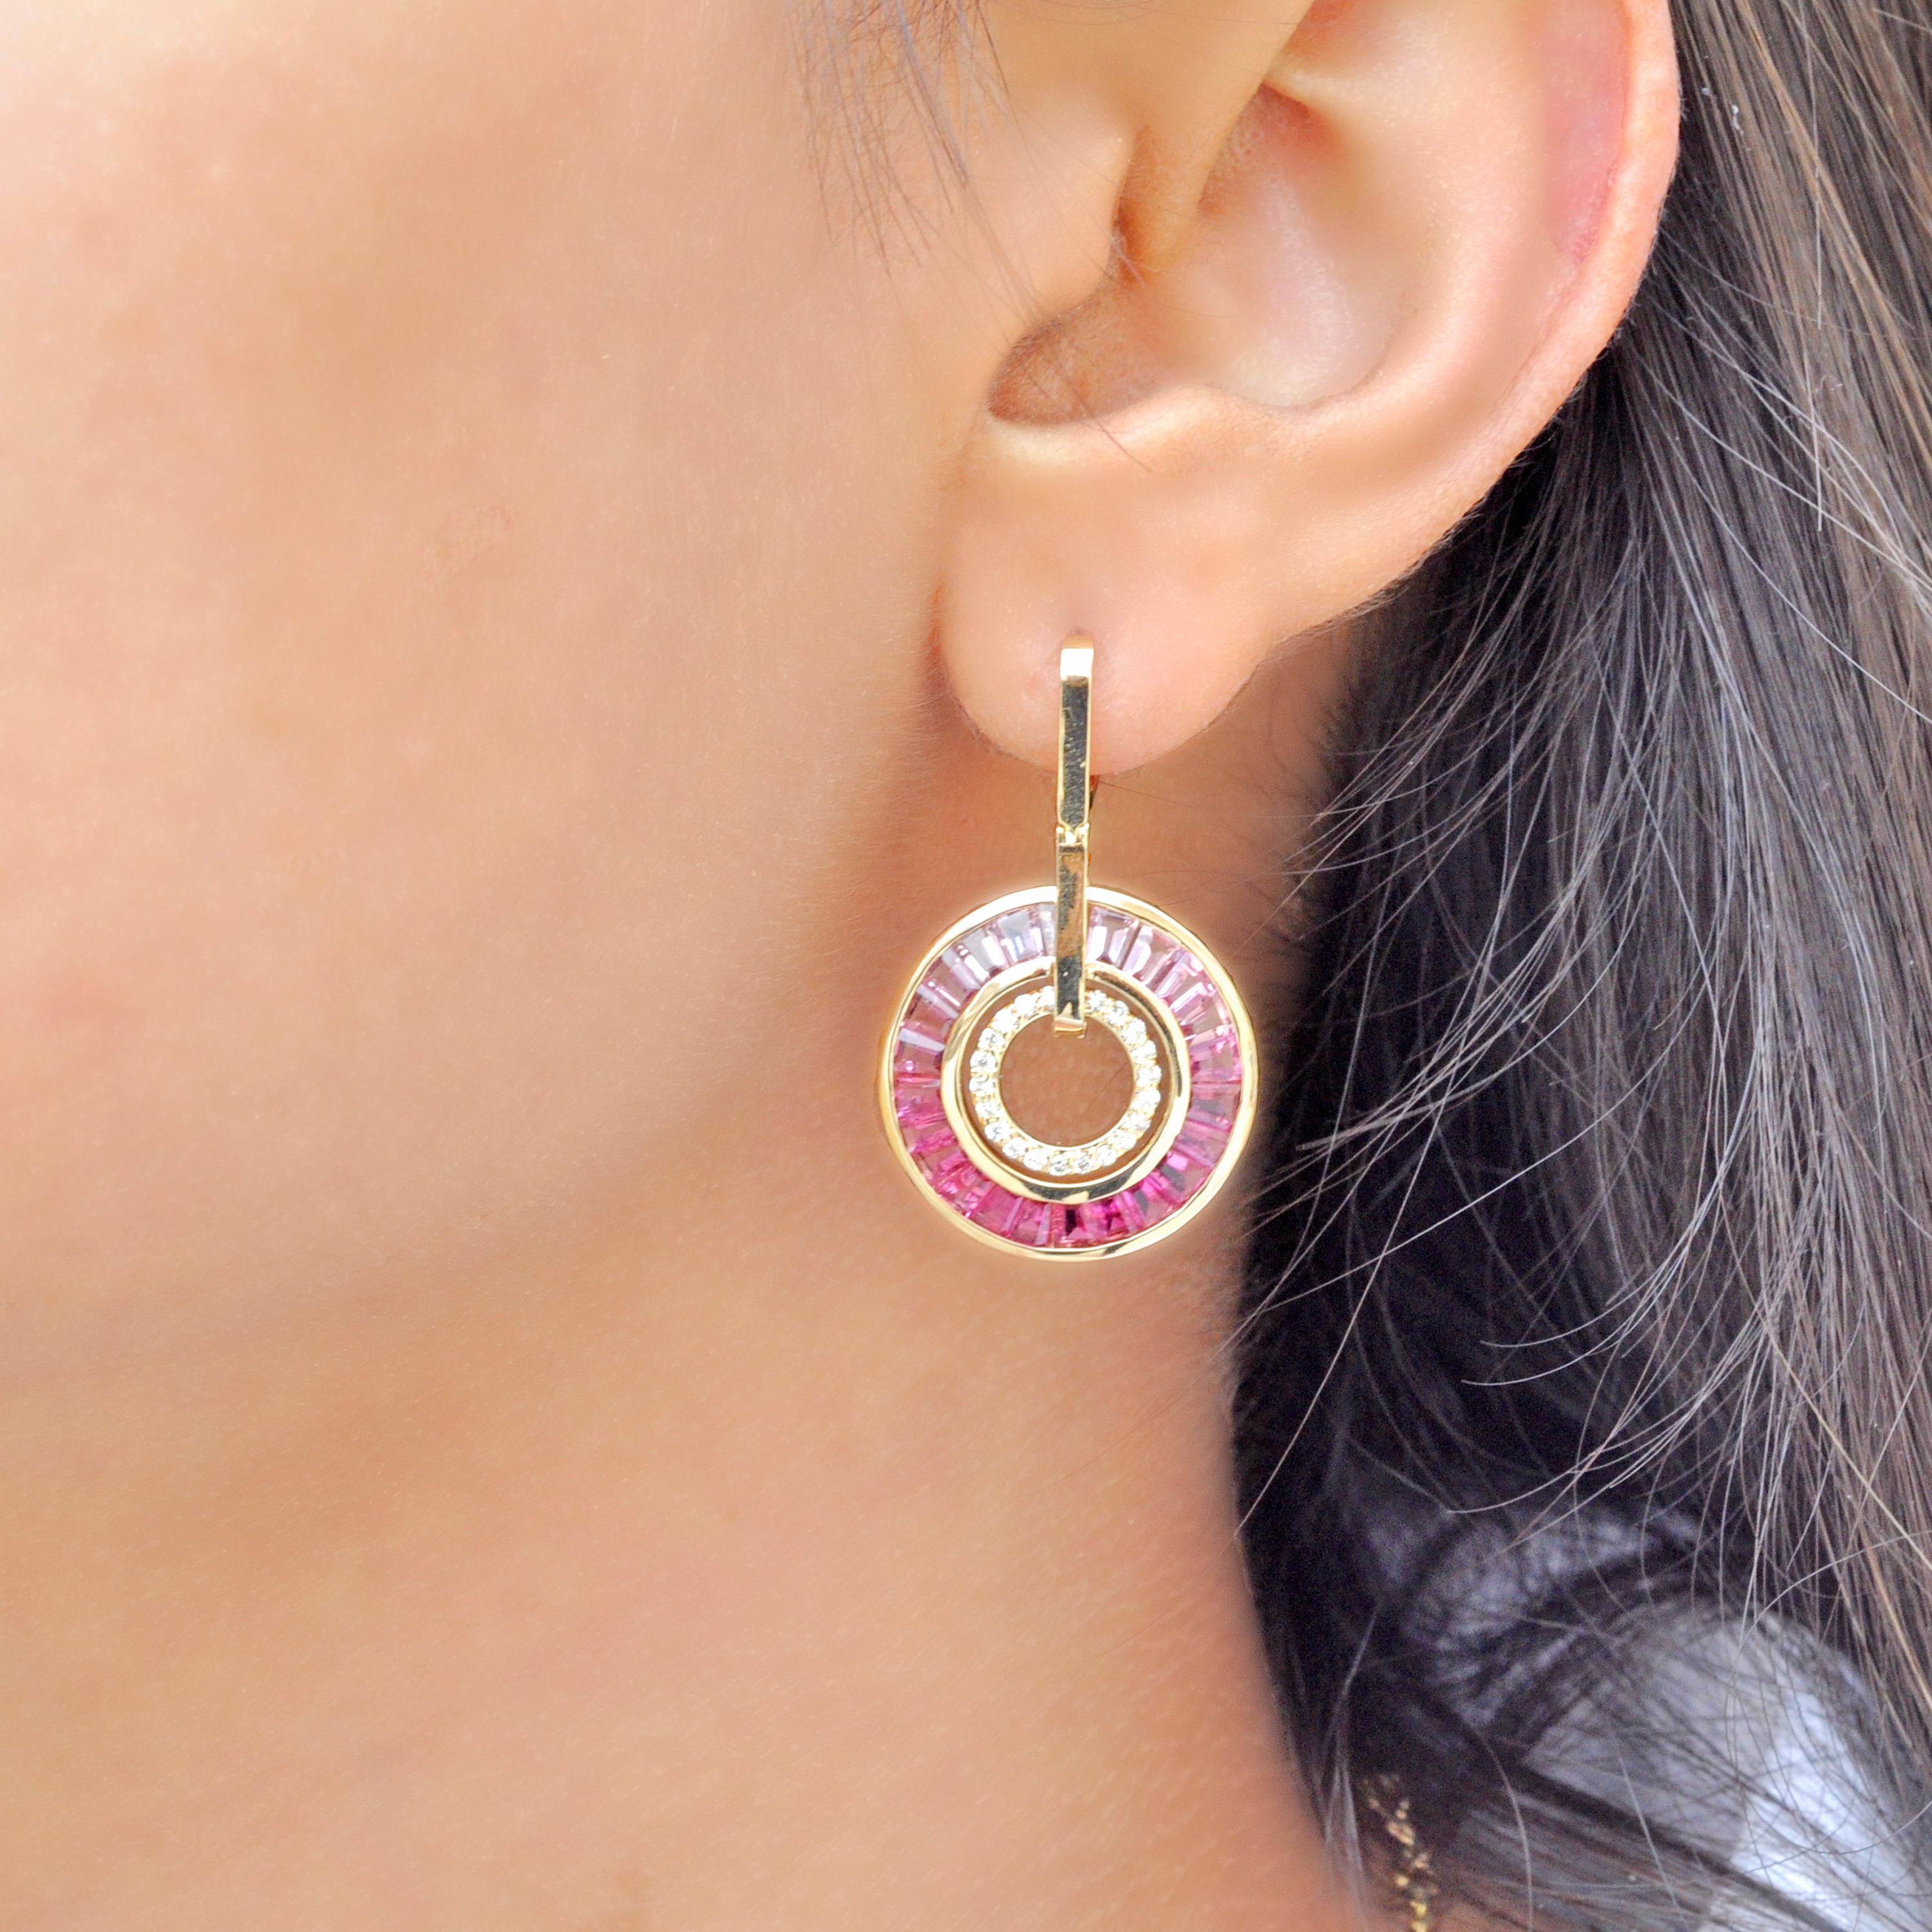 18k gold pink tourmaline taper baguettes diamond circle dangle art deco inspired earrings

These 18 karat gold stunning dangle earrings are a mesmerizing blend of sophistication and grace, where lustrous pink tourmalines are circularly complimented